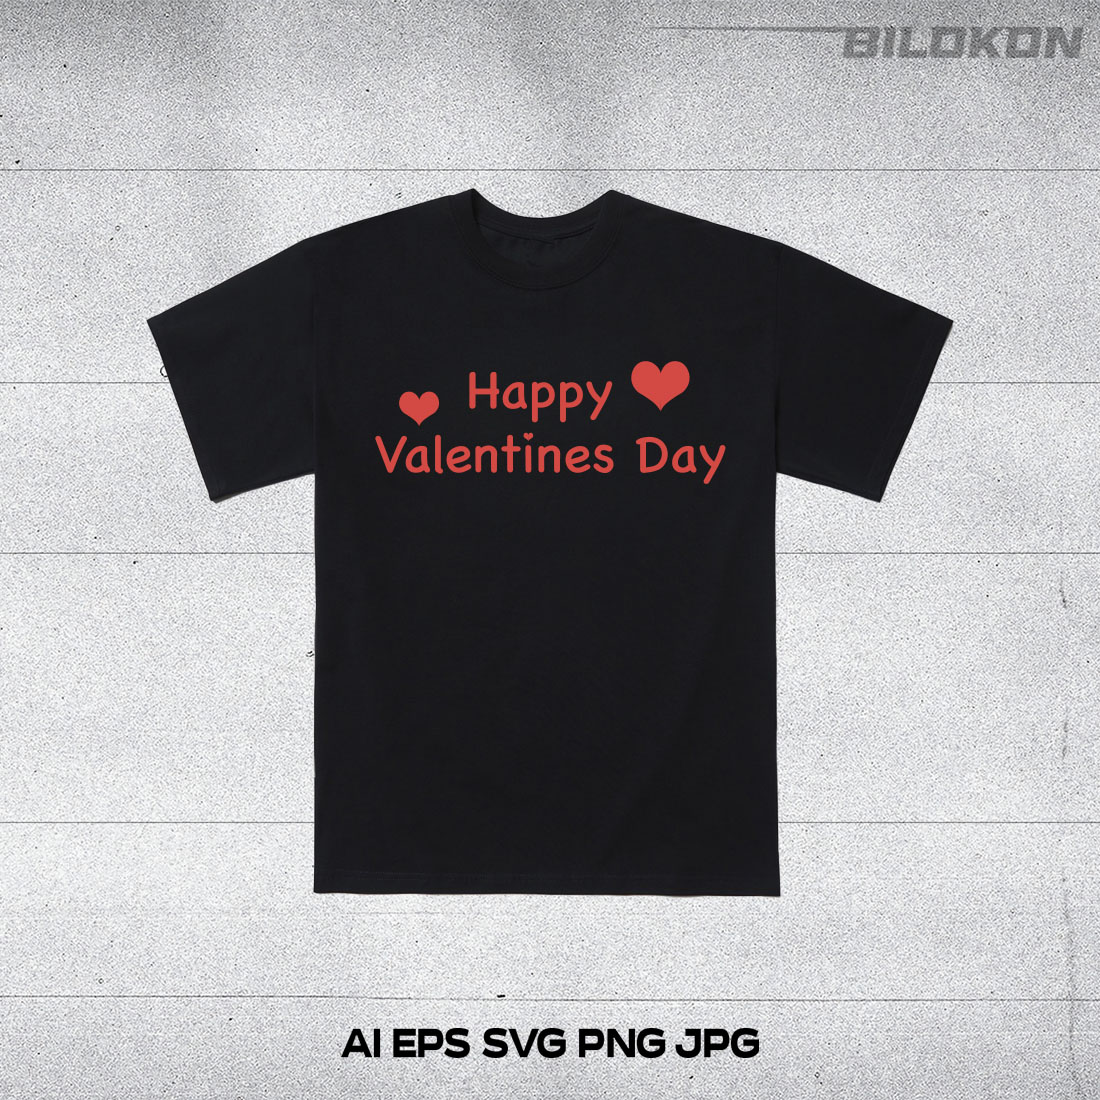 T-shirt Happy Valentine's Day Vector Illustration cover image.